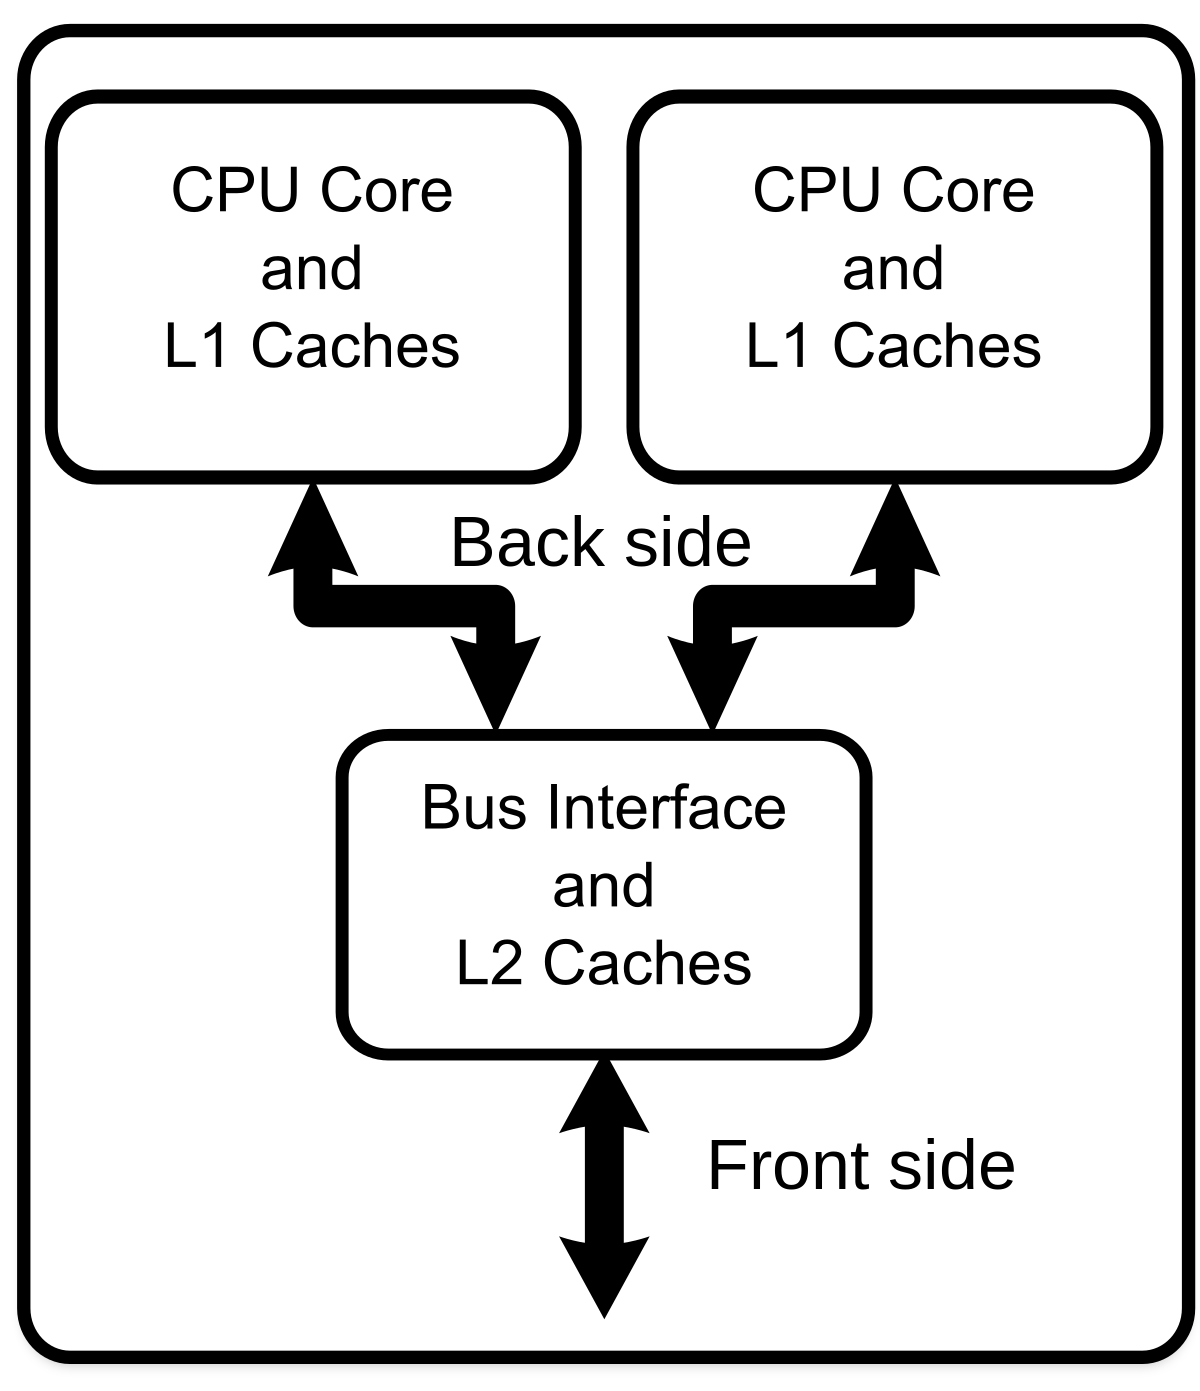 A powerful CPU can enhance the responsiveness and speed of applications and software.
The number of CPU cores influences the multitasking capability and parallel processing abilities.